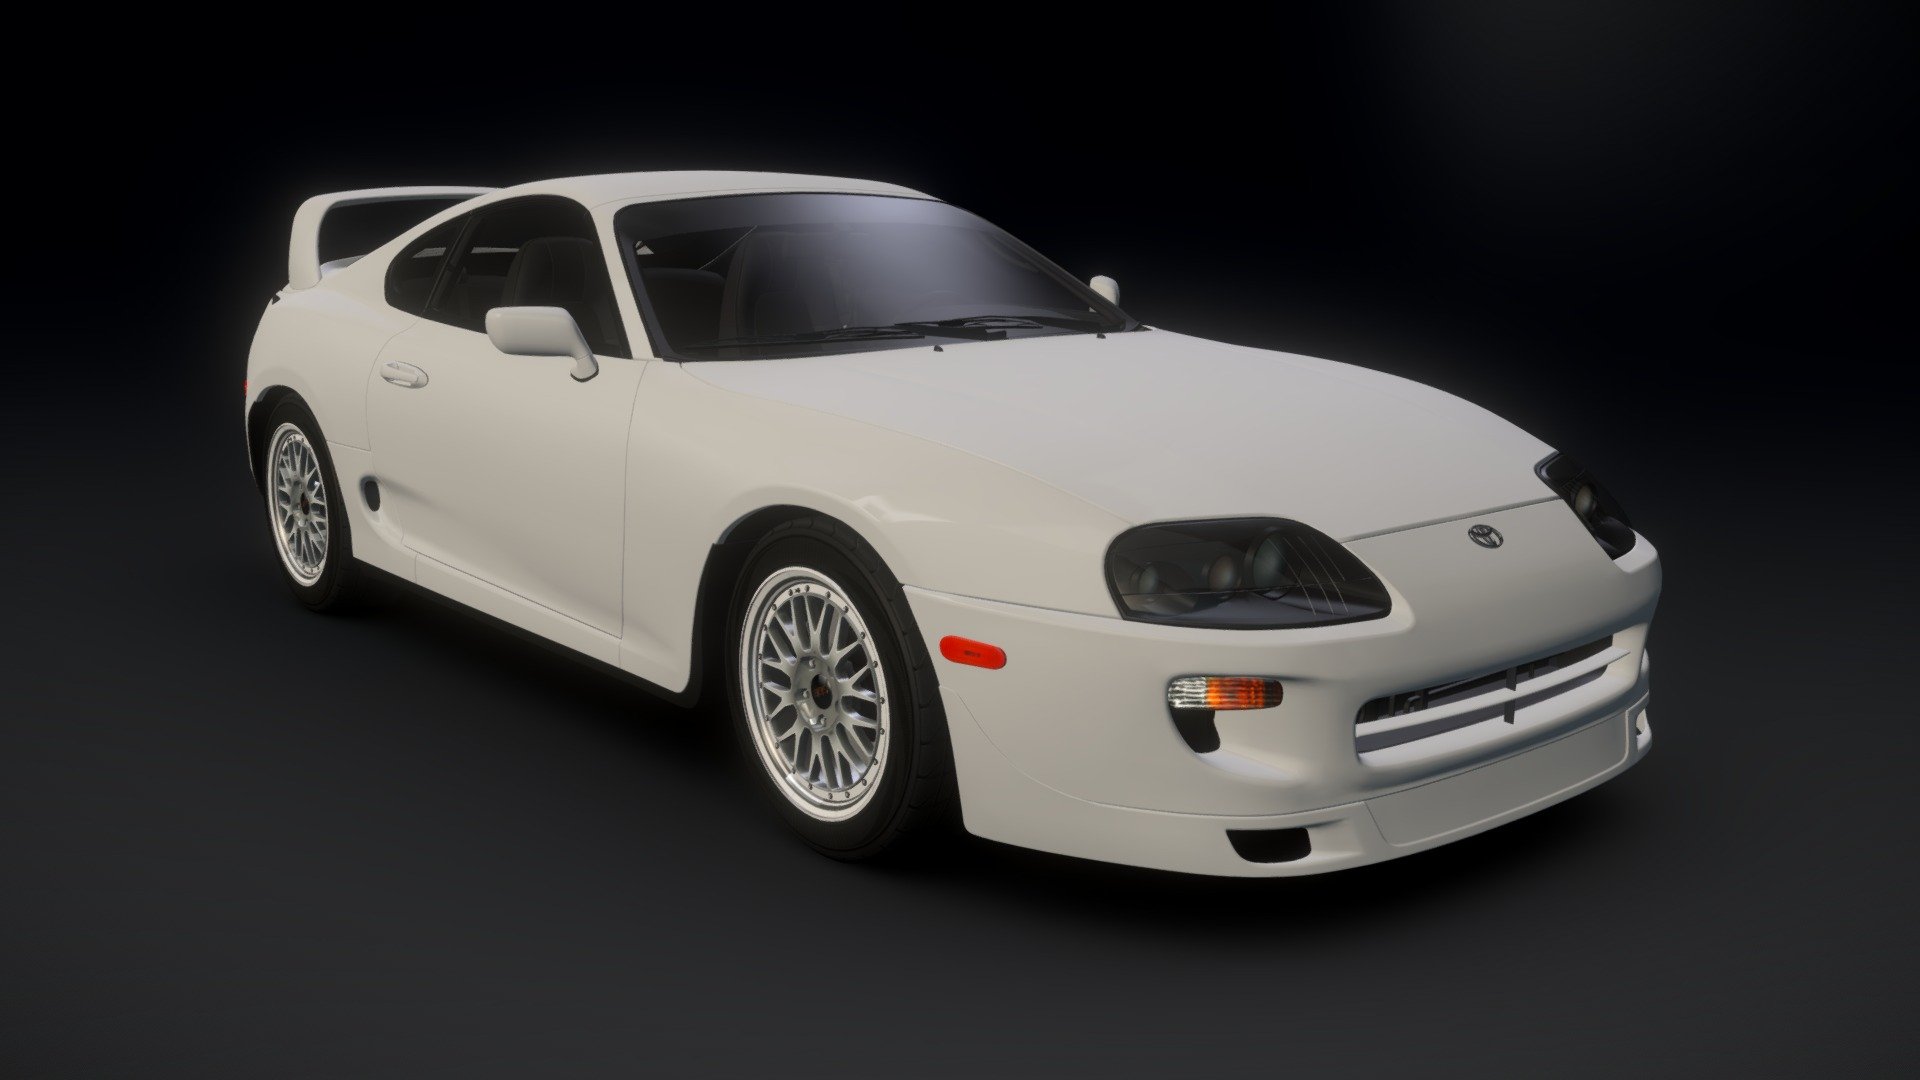 Paul Walkers Toyota Supra Turbo targa top from Forza Horizon 2, also featured at the end of Fast and Furious 7. Apparently the one used in the movie was actually his own car 3d model